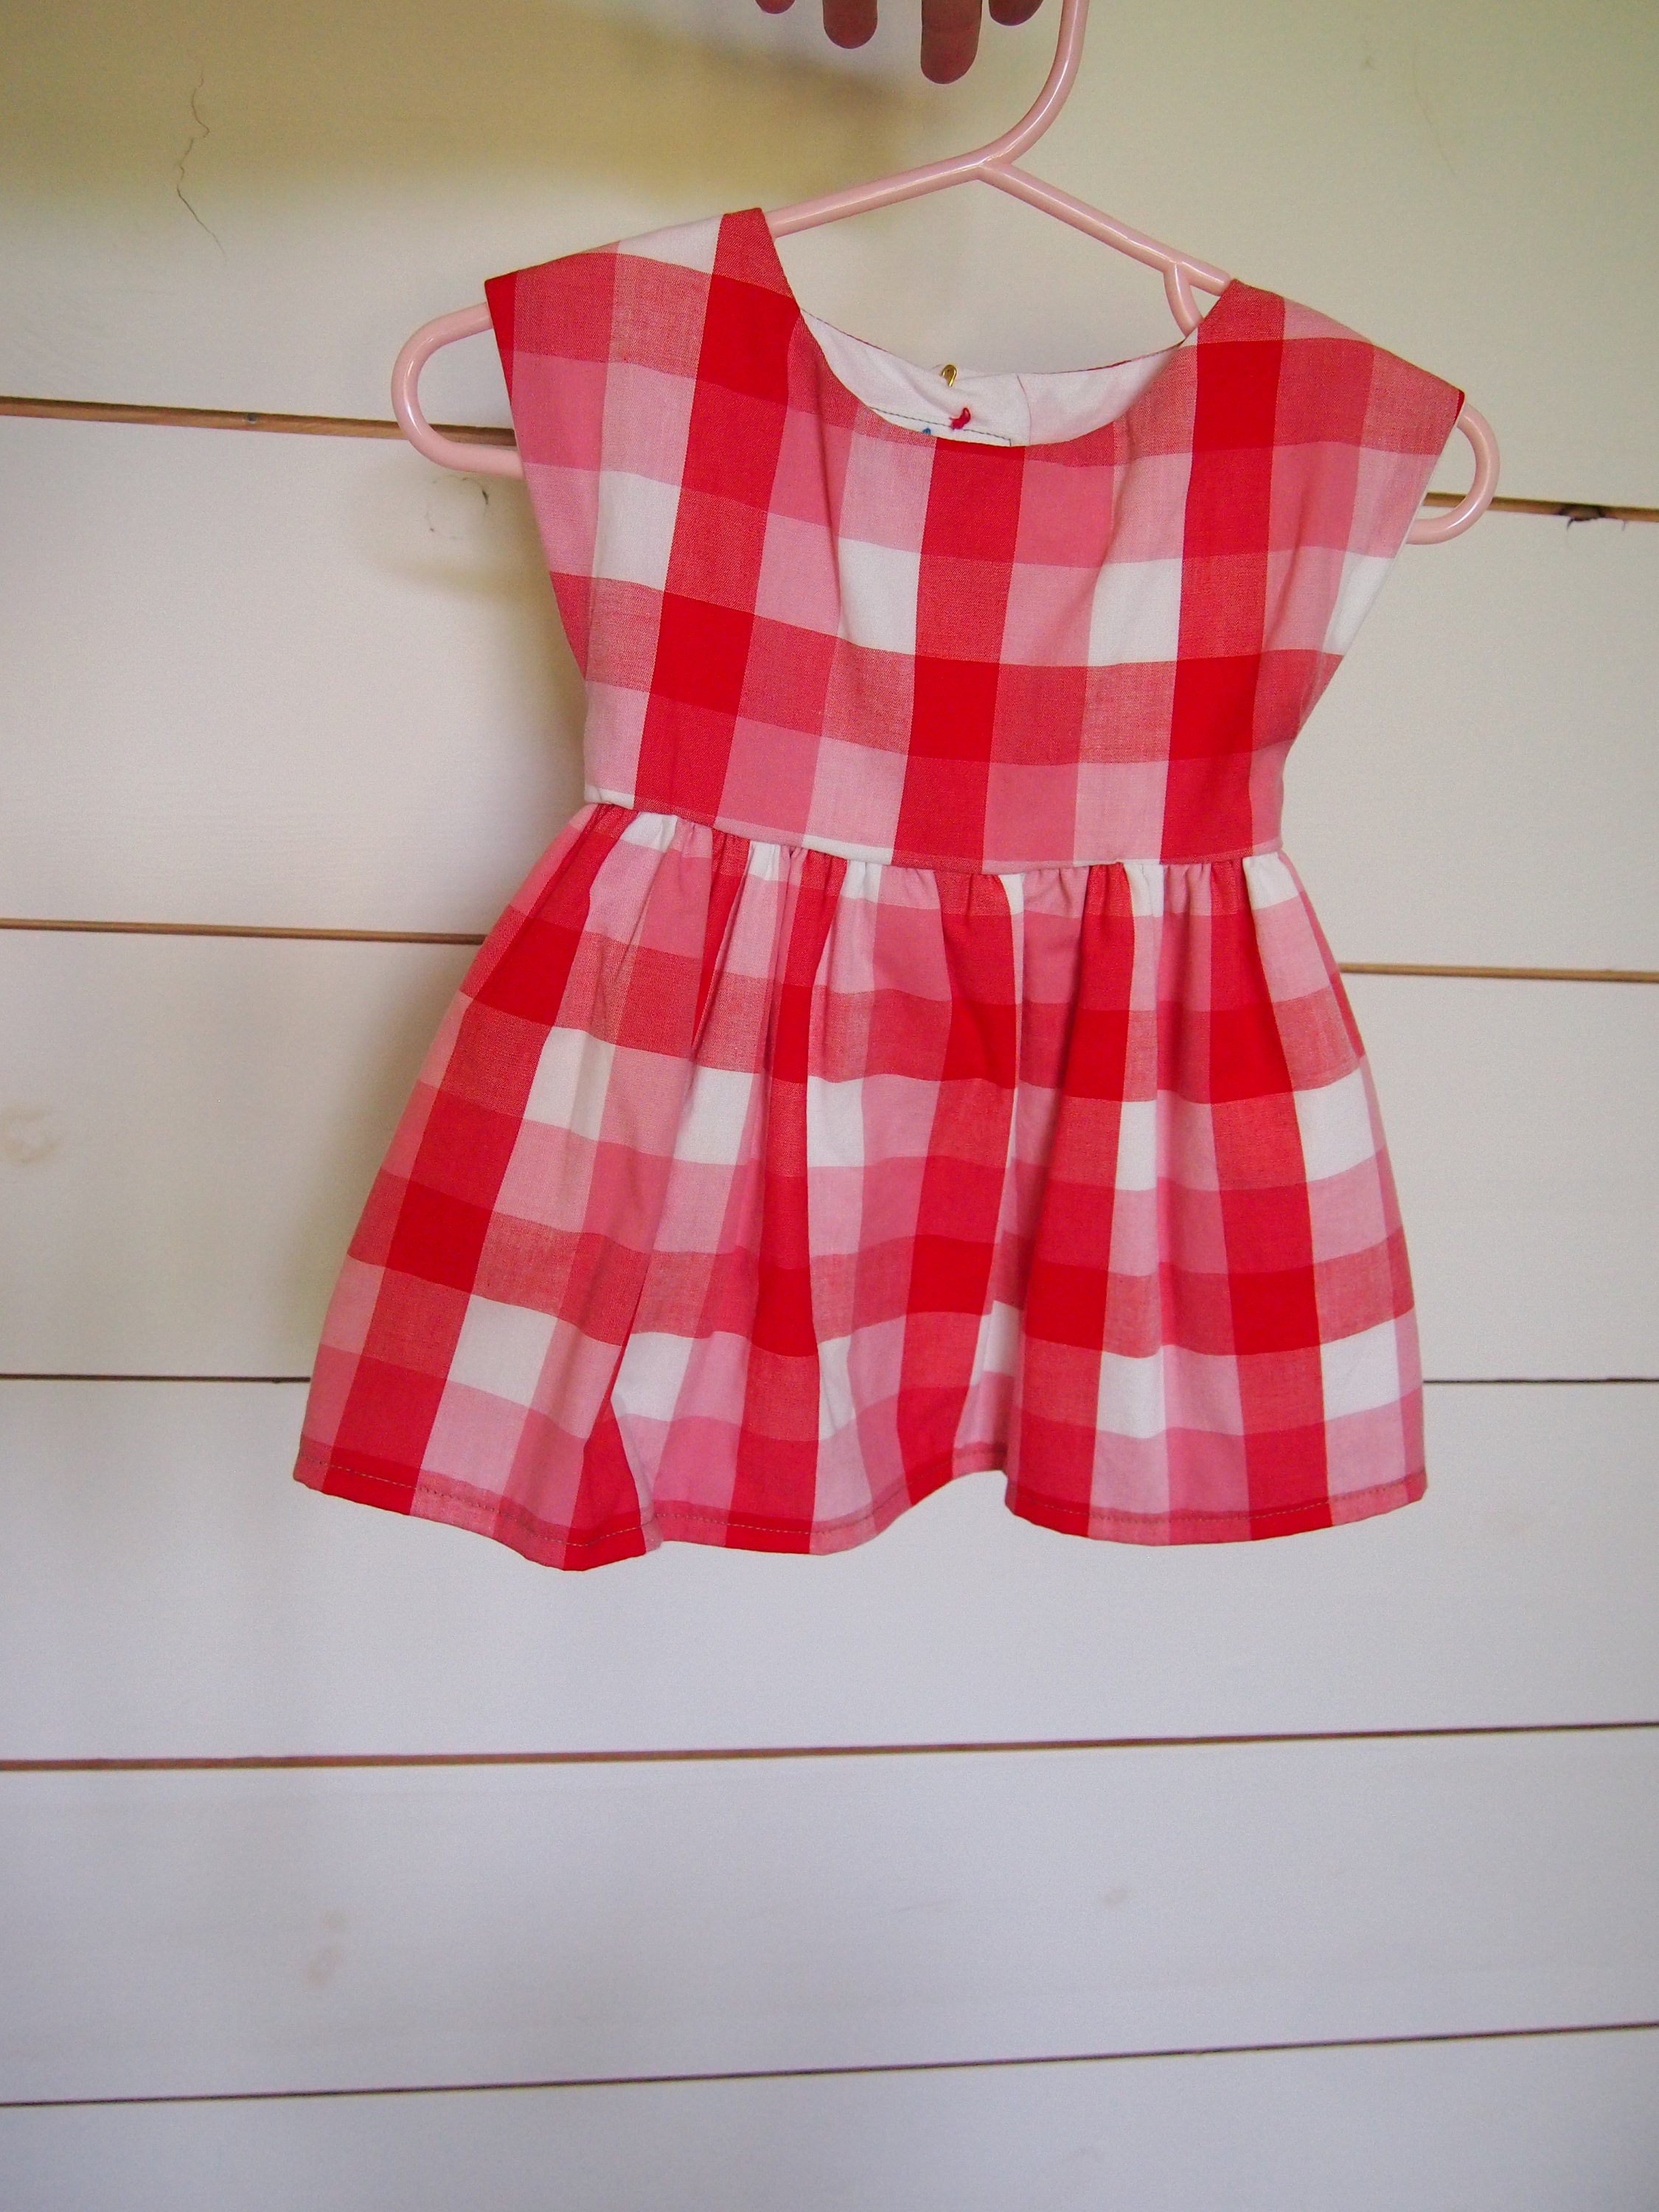 red and white gingham dress